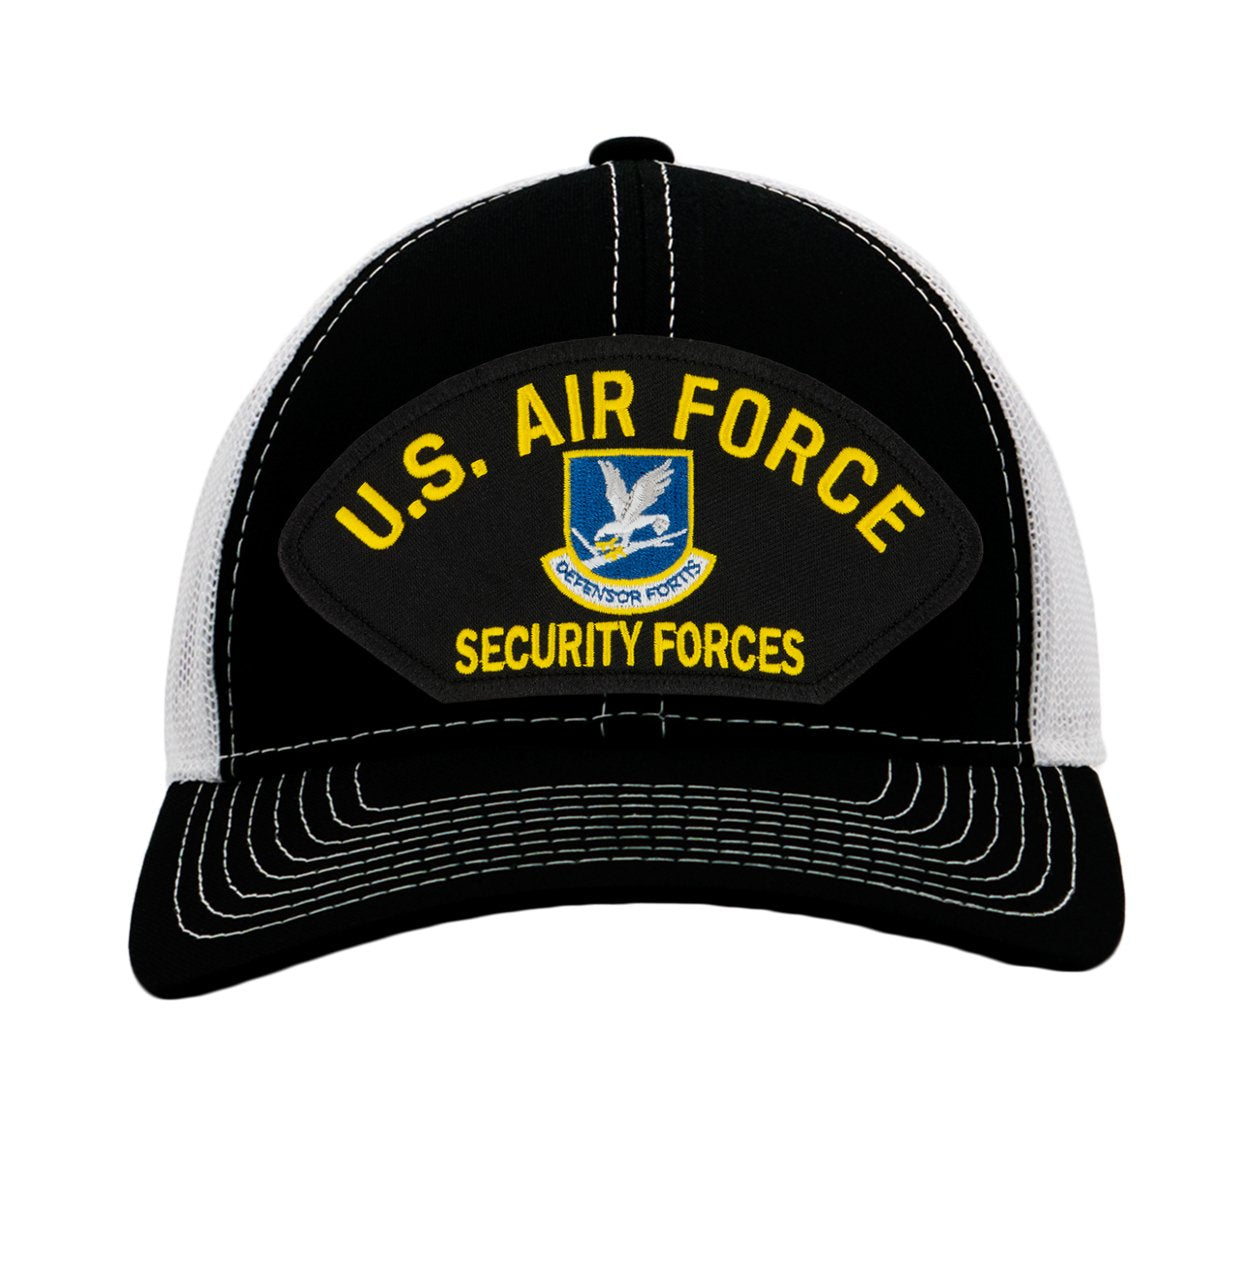 US Air Force - Security Forces Hat - Multiple Colors Available